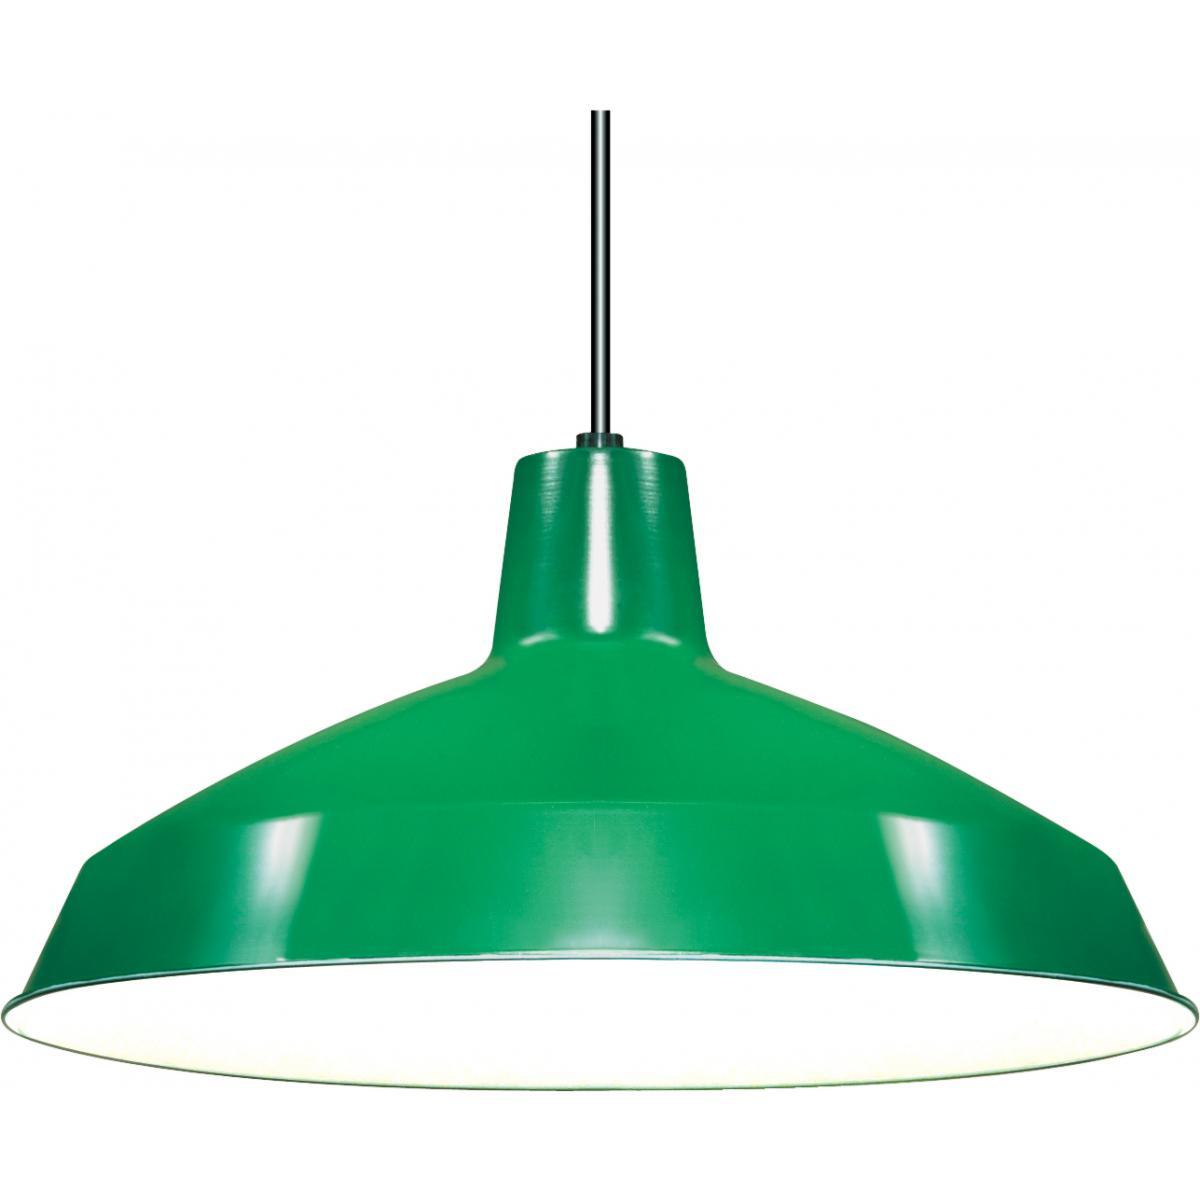 16" Classic Warehouse Pendant with Green Shade Ceiling Nuvo Lighting 